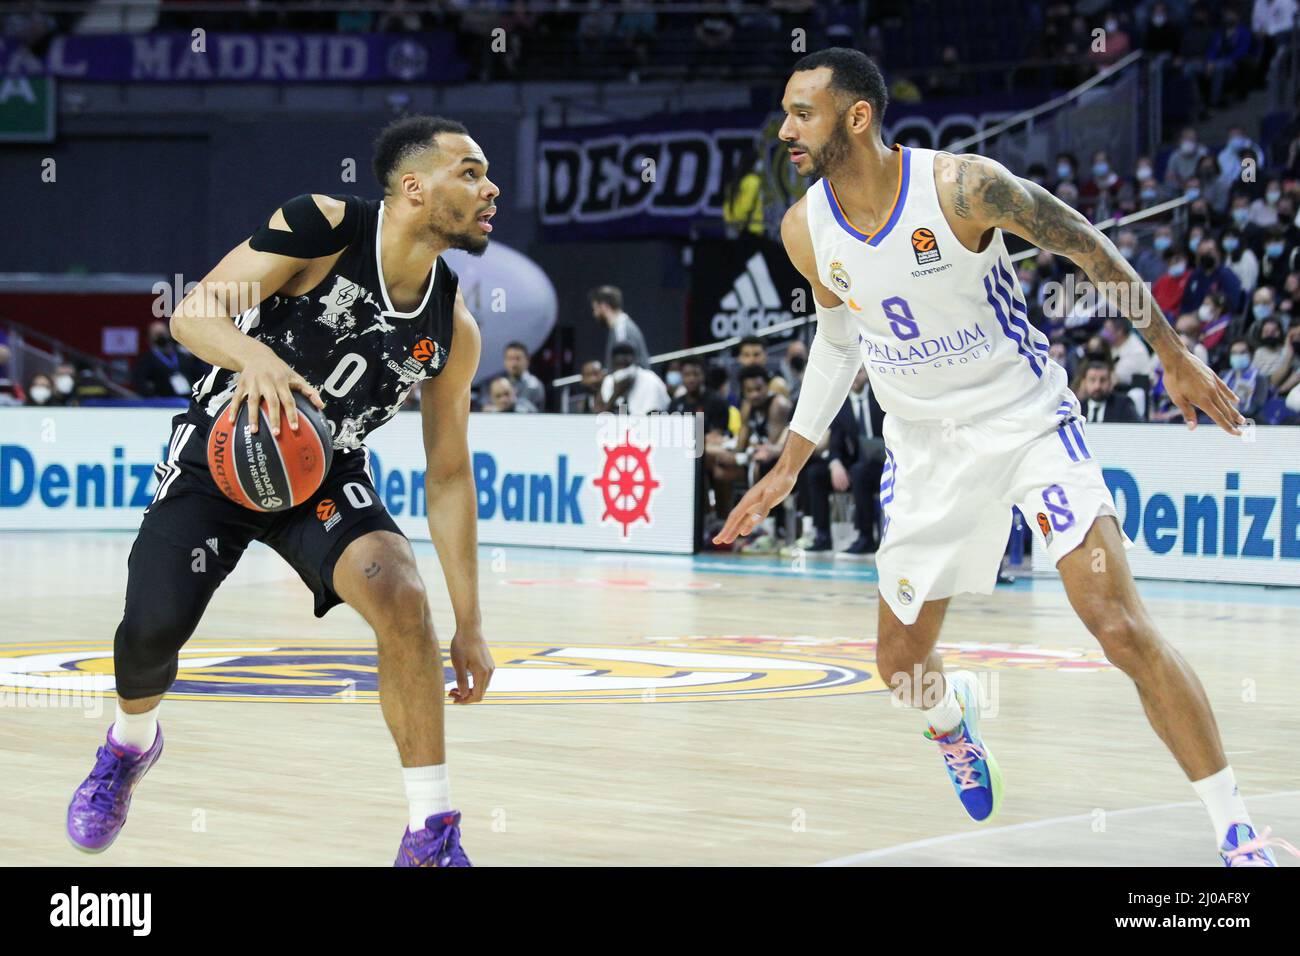 Madrid, Spain. 17th Mar, 2022. Elie Okobo of Asvel Lyon-Villeurbanne and Adam Hanga of Real Madrid during the Turkish Airlines Euroleague basketball match between Real Madrid and Asvel Lyon-Villeurbanne on march 17, 2022 at Wizink Center in Madrid, Spain Credit: Independent Photo Agency/Alamy Live Newss Stock Photo